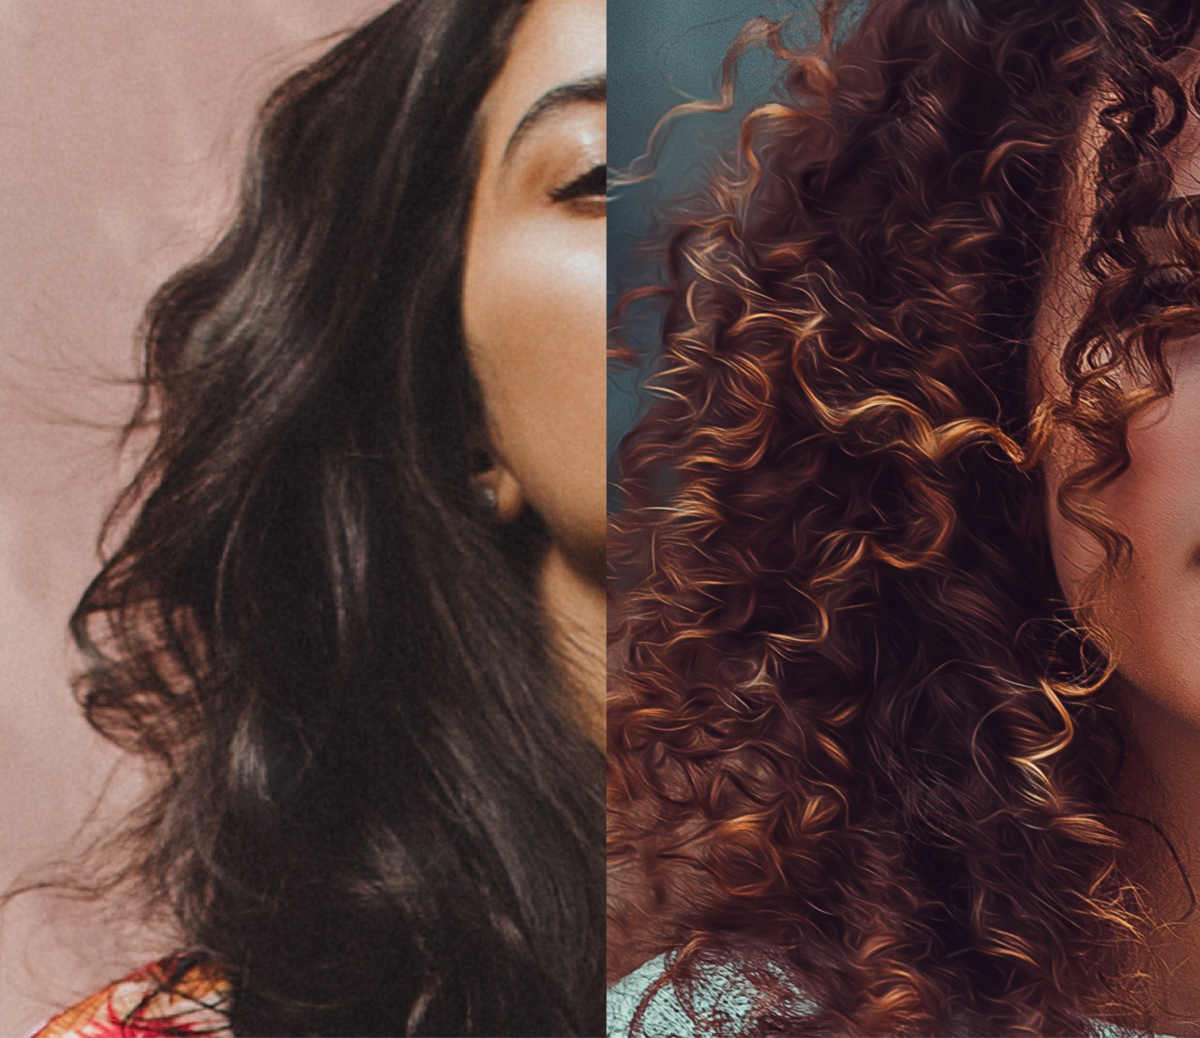 Wavy vs. Curly vs. Coily Hair vs. Kinky Hair: How To Identify and Care For Each